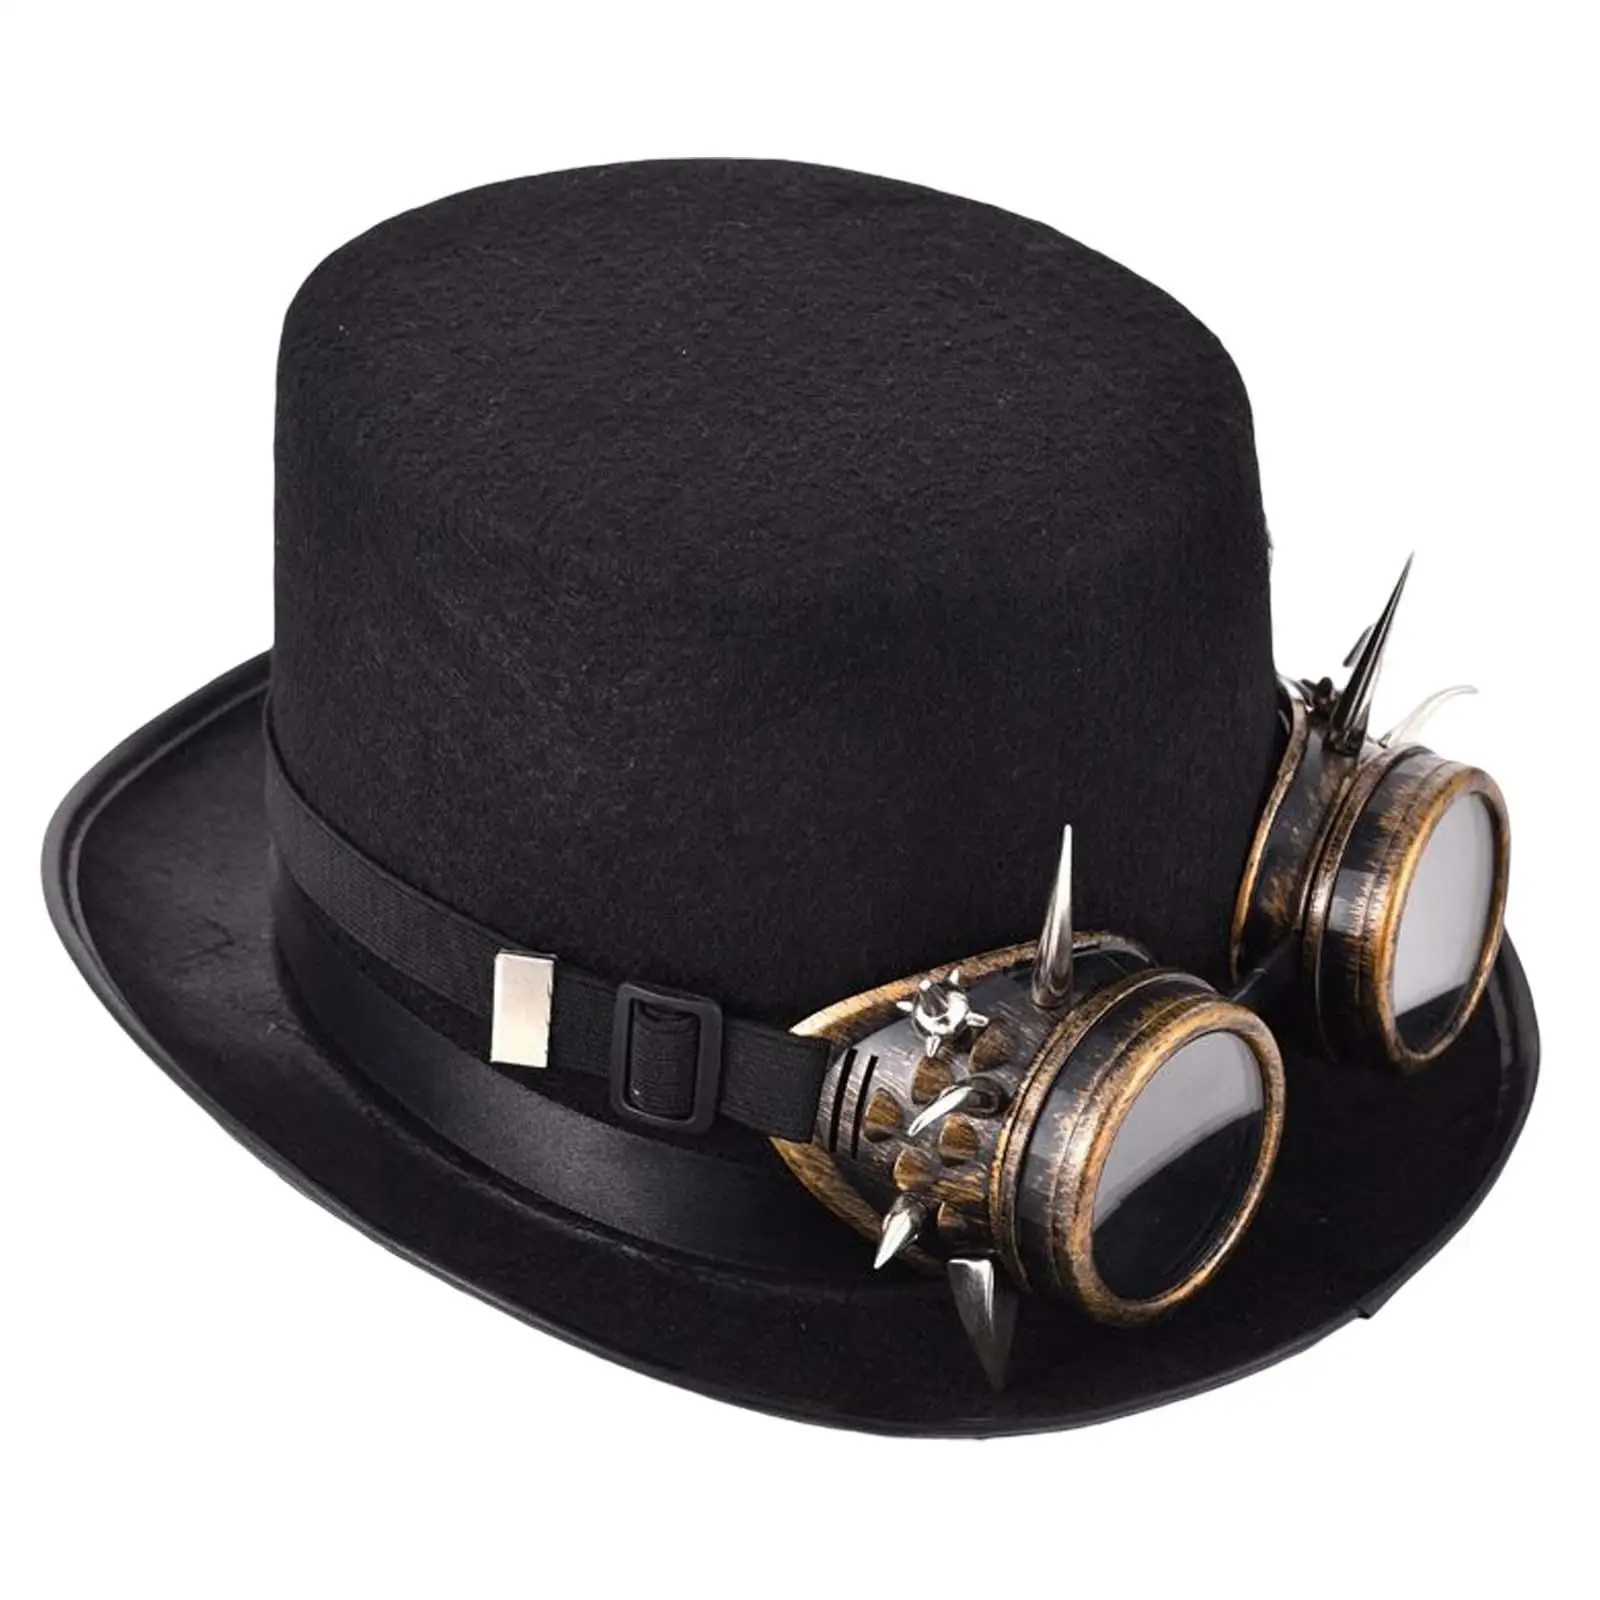 Punk Steampunk Hat with Goggles Black Top Hat Elegant for Men Women DIY Yourself Accessories Masquerade Costume Party Durable